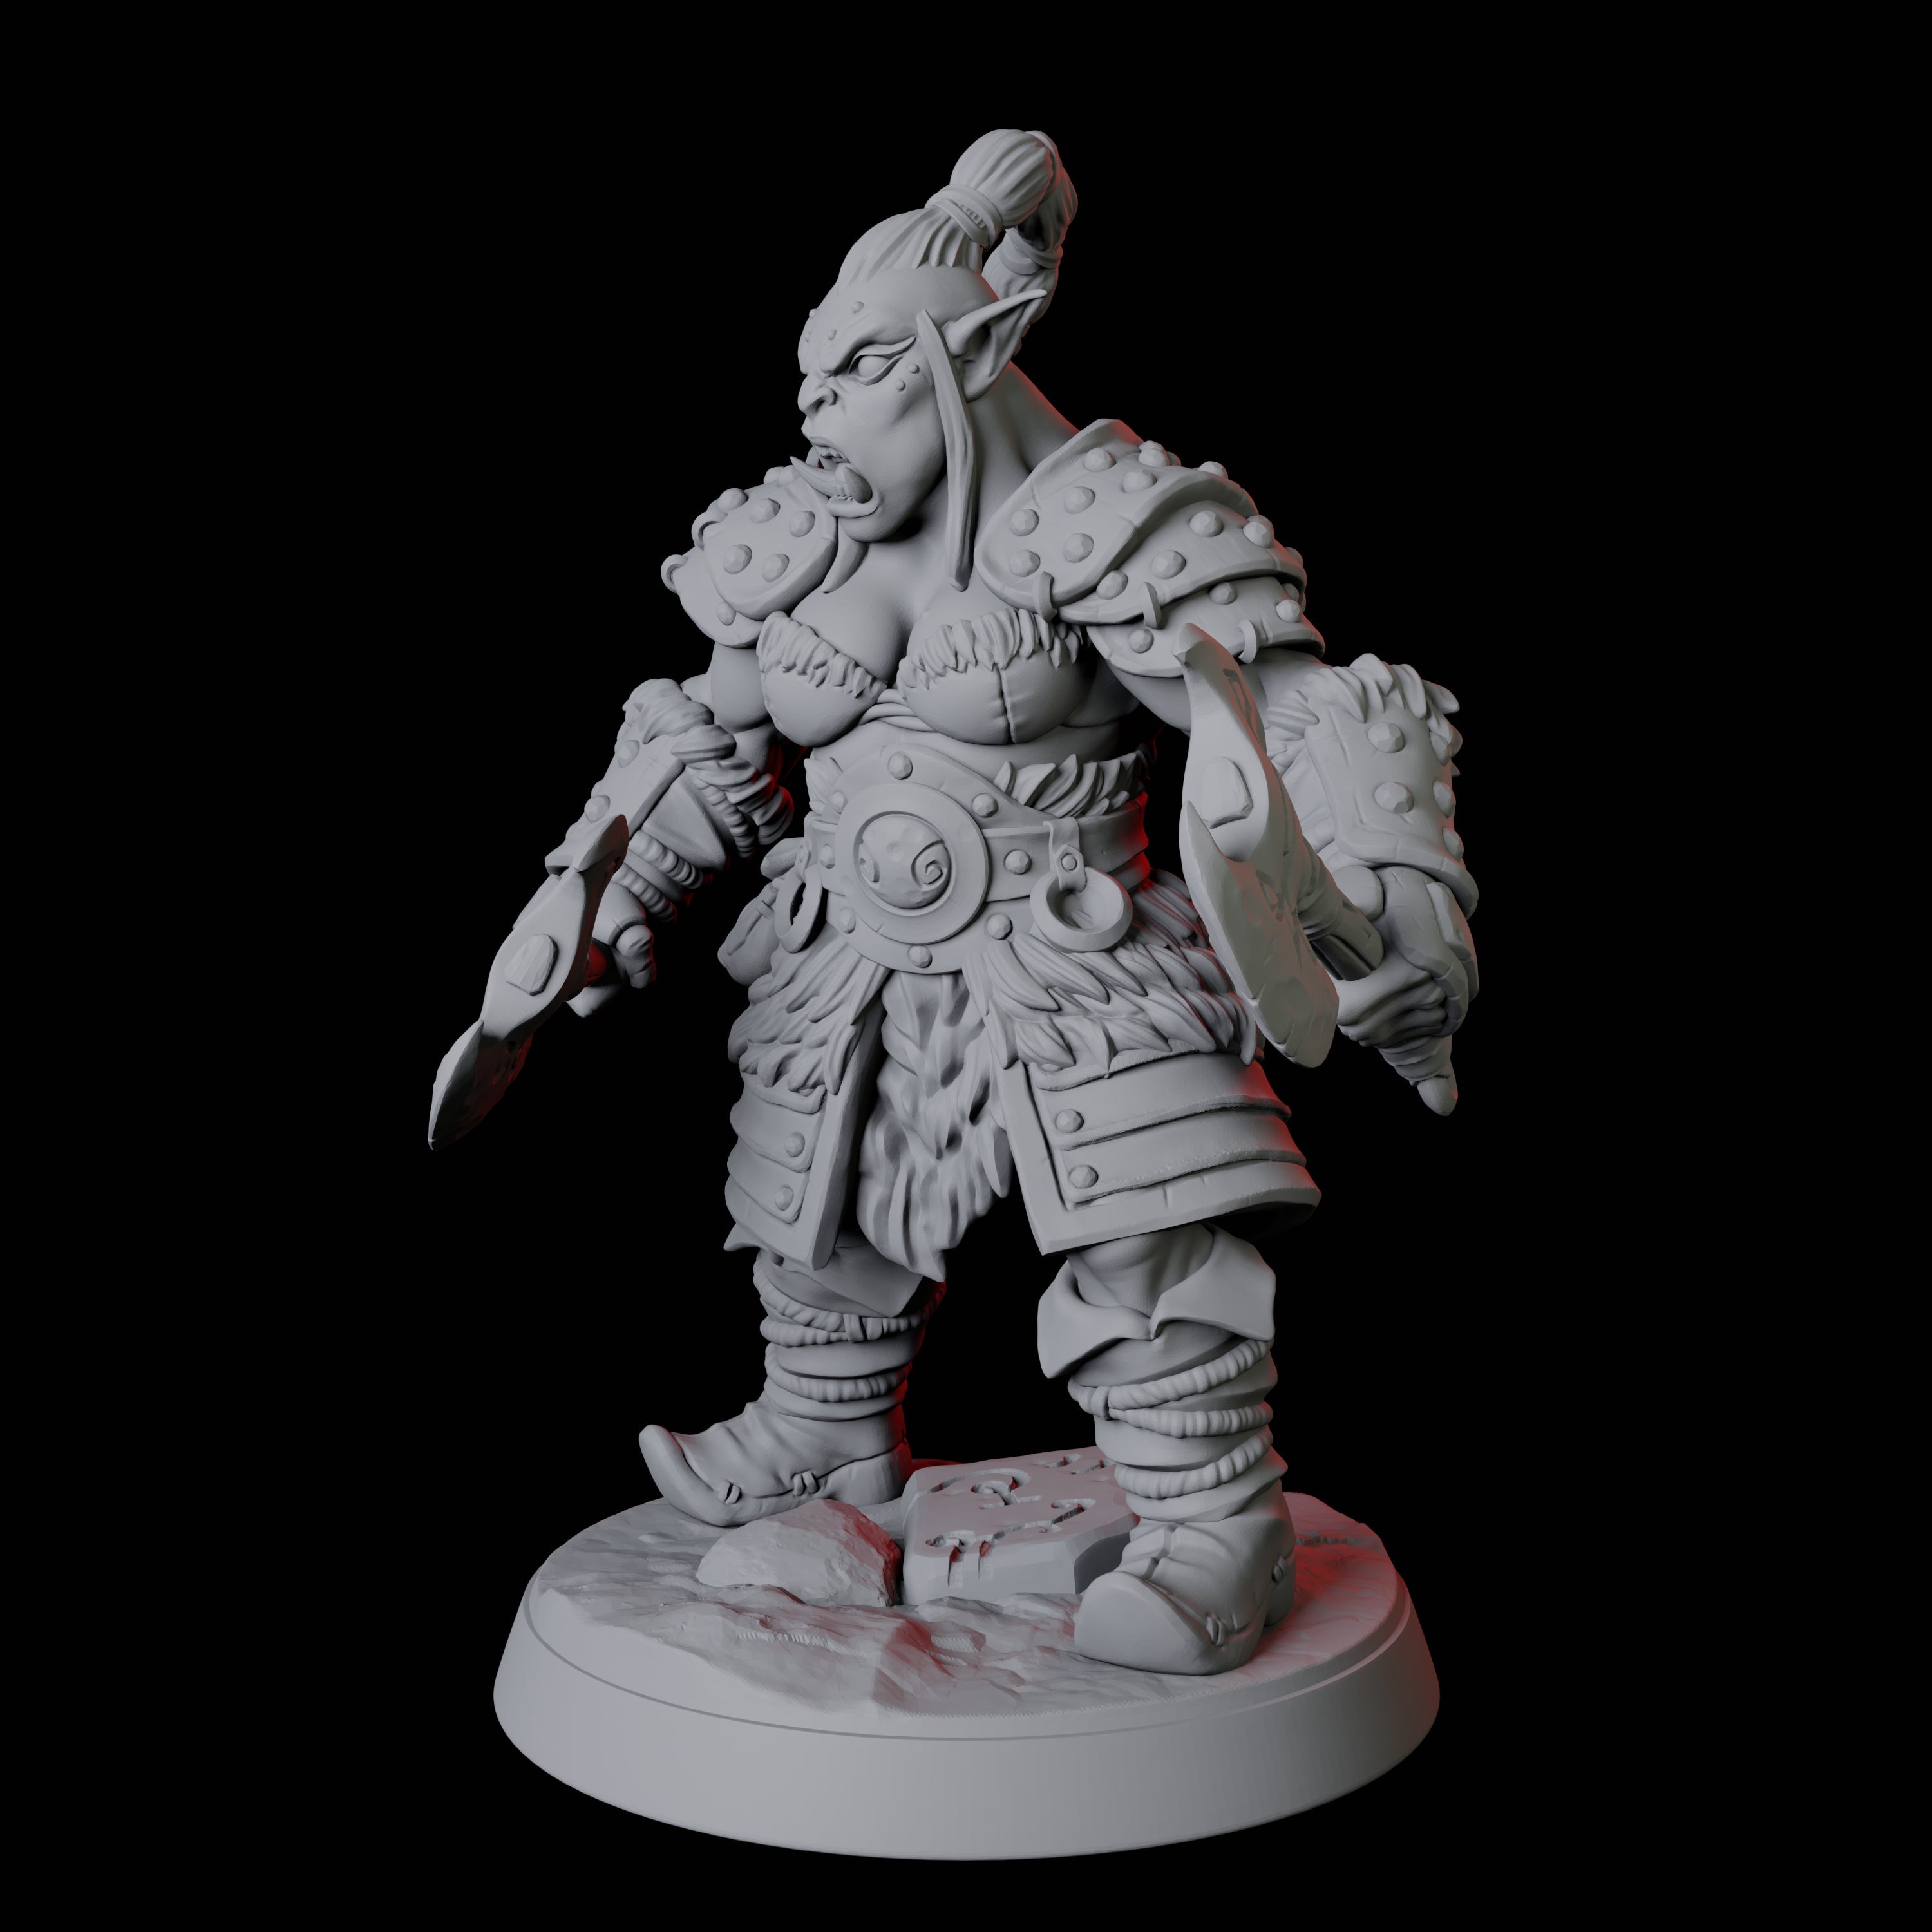 Mountain Orc Warrior F Miniature for Dungeons and Dragons, Pathfinder or other TTRPGs